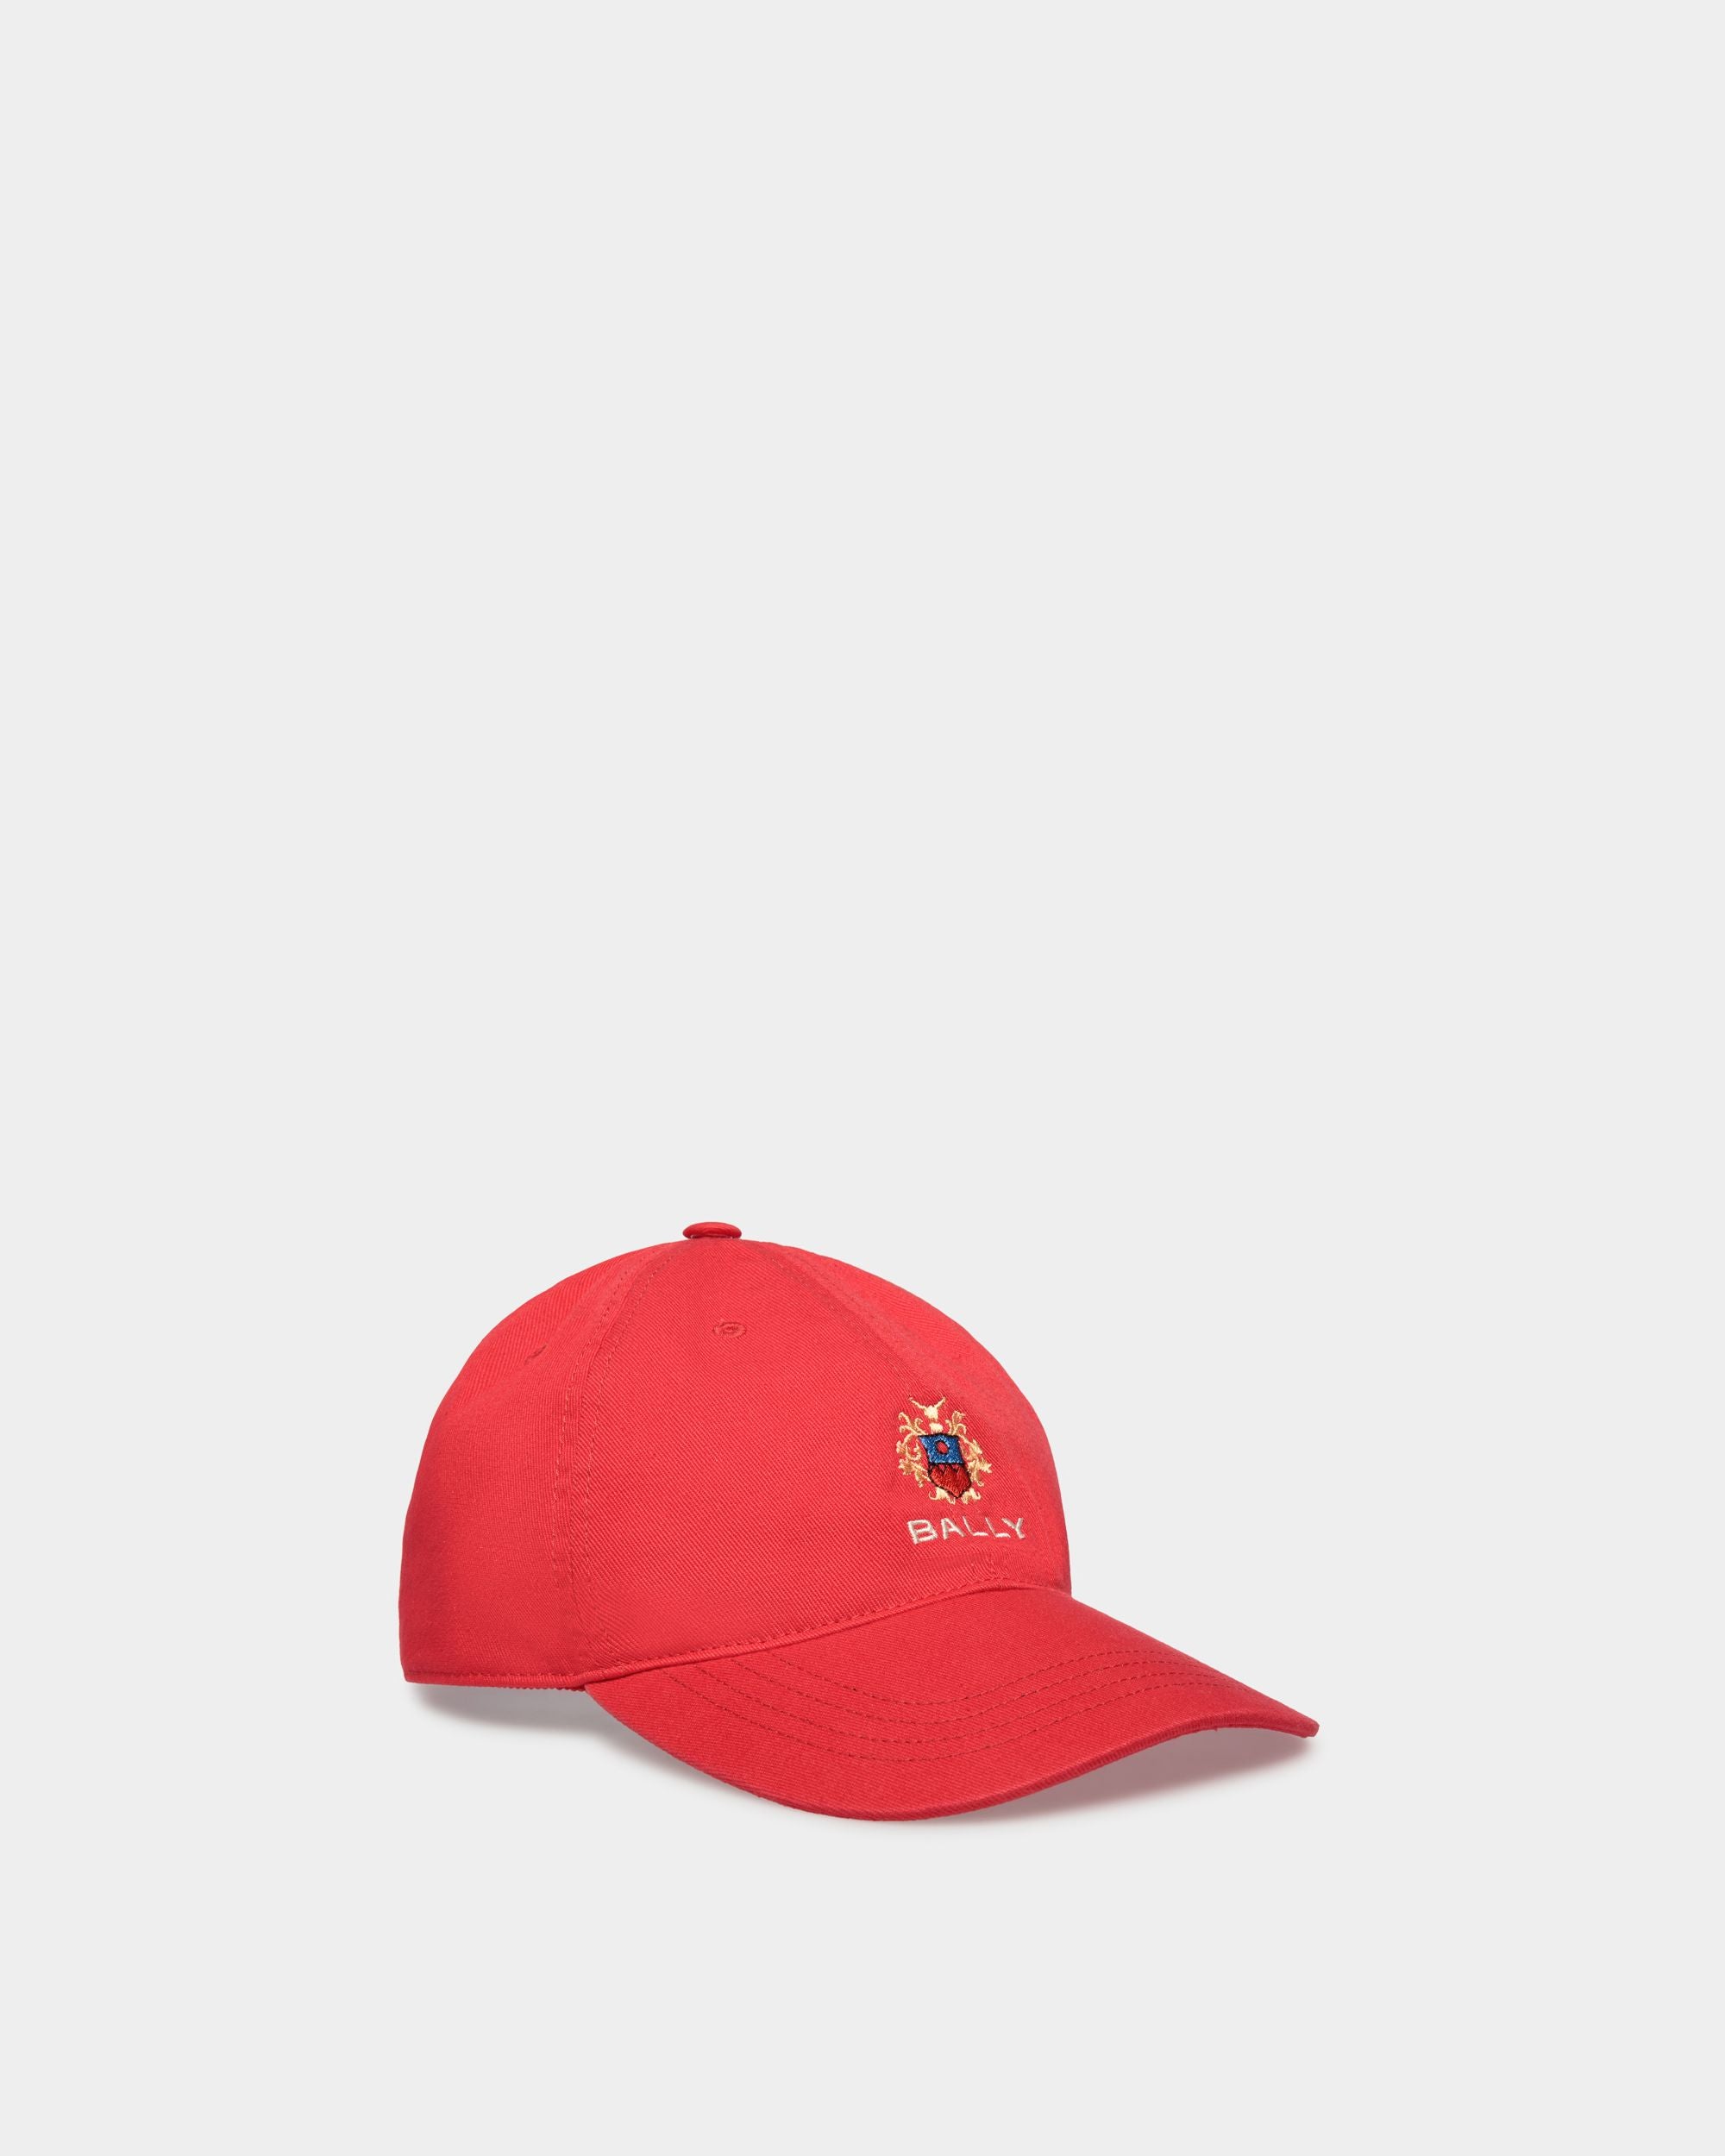 Men's Baseball Hat in Candy Red Cotton | Bally | Still Life Front